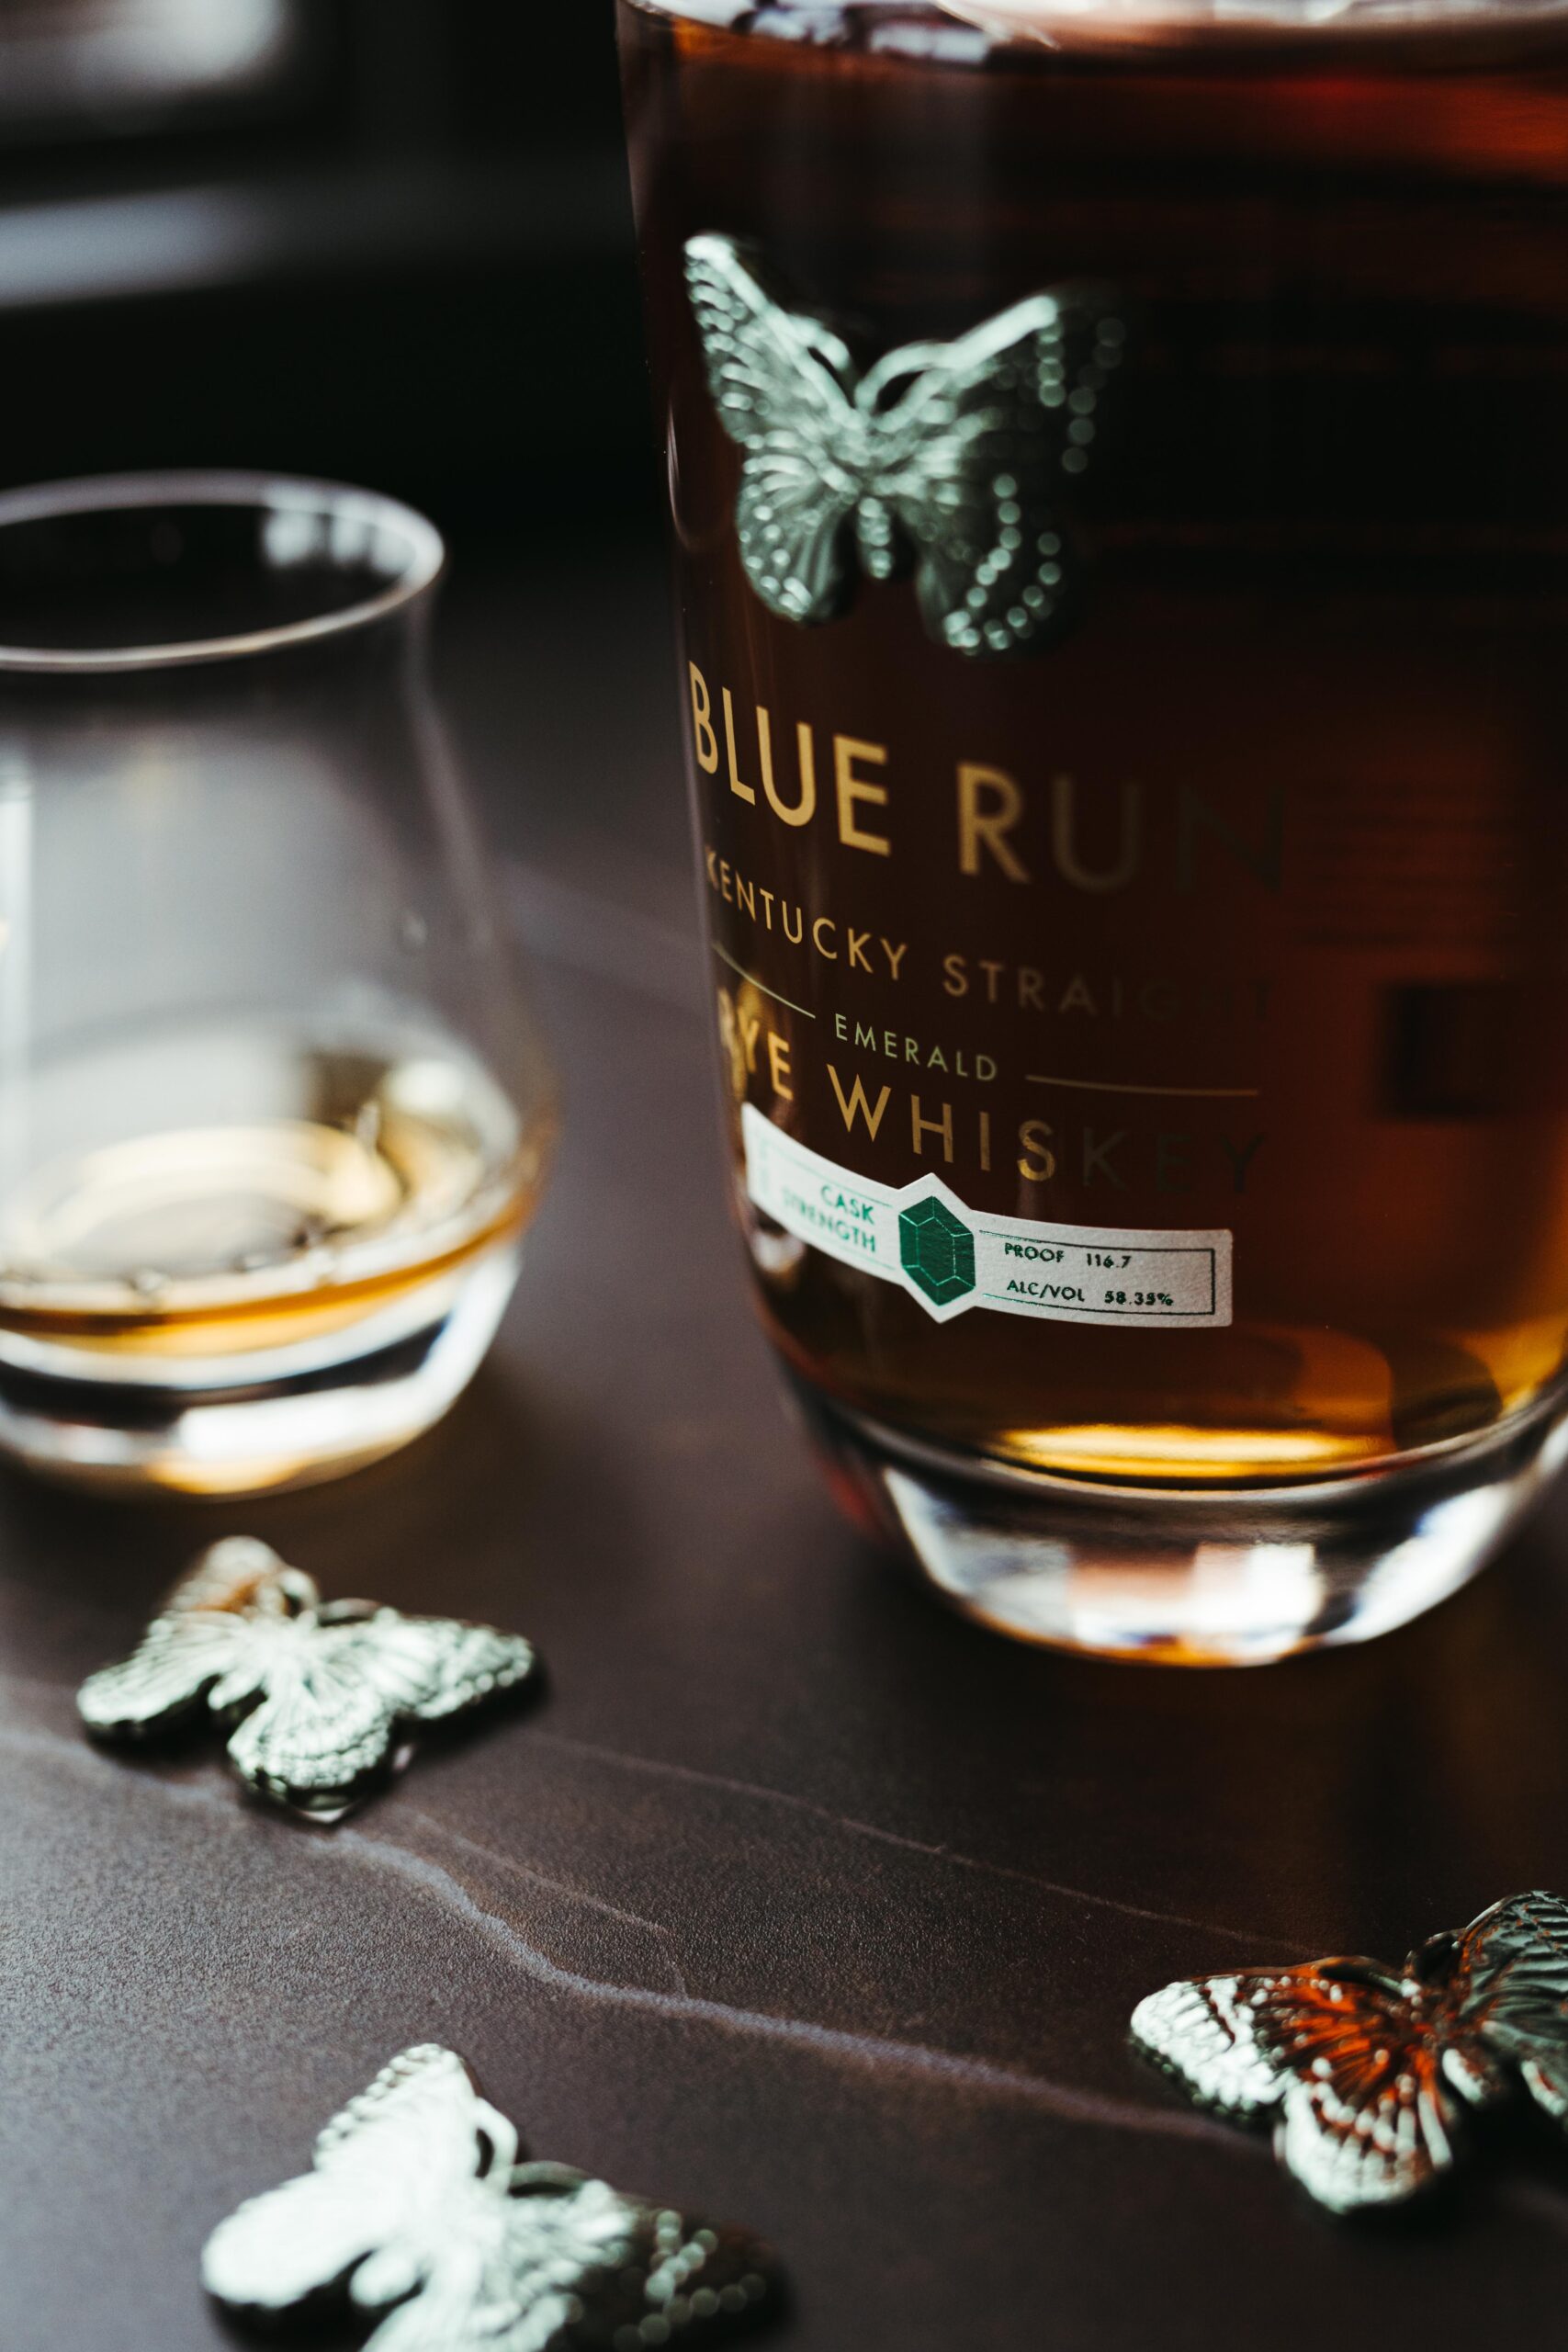 New Barrel Proof Rye Whiskey From Blue Run